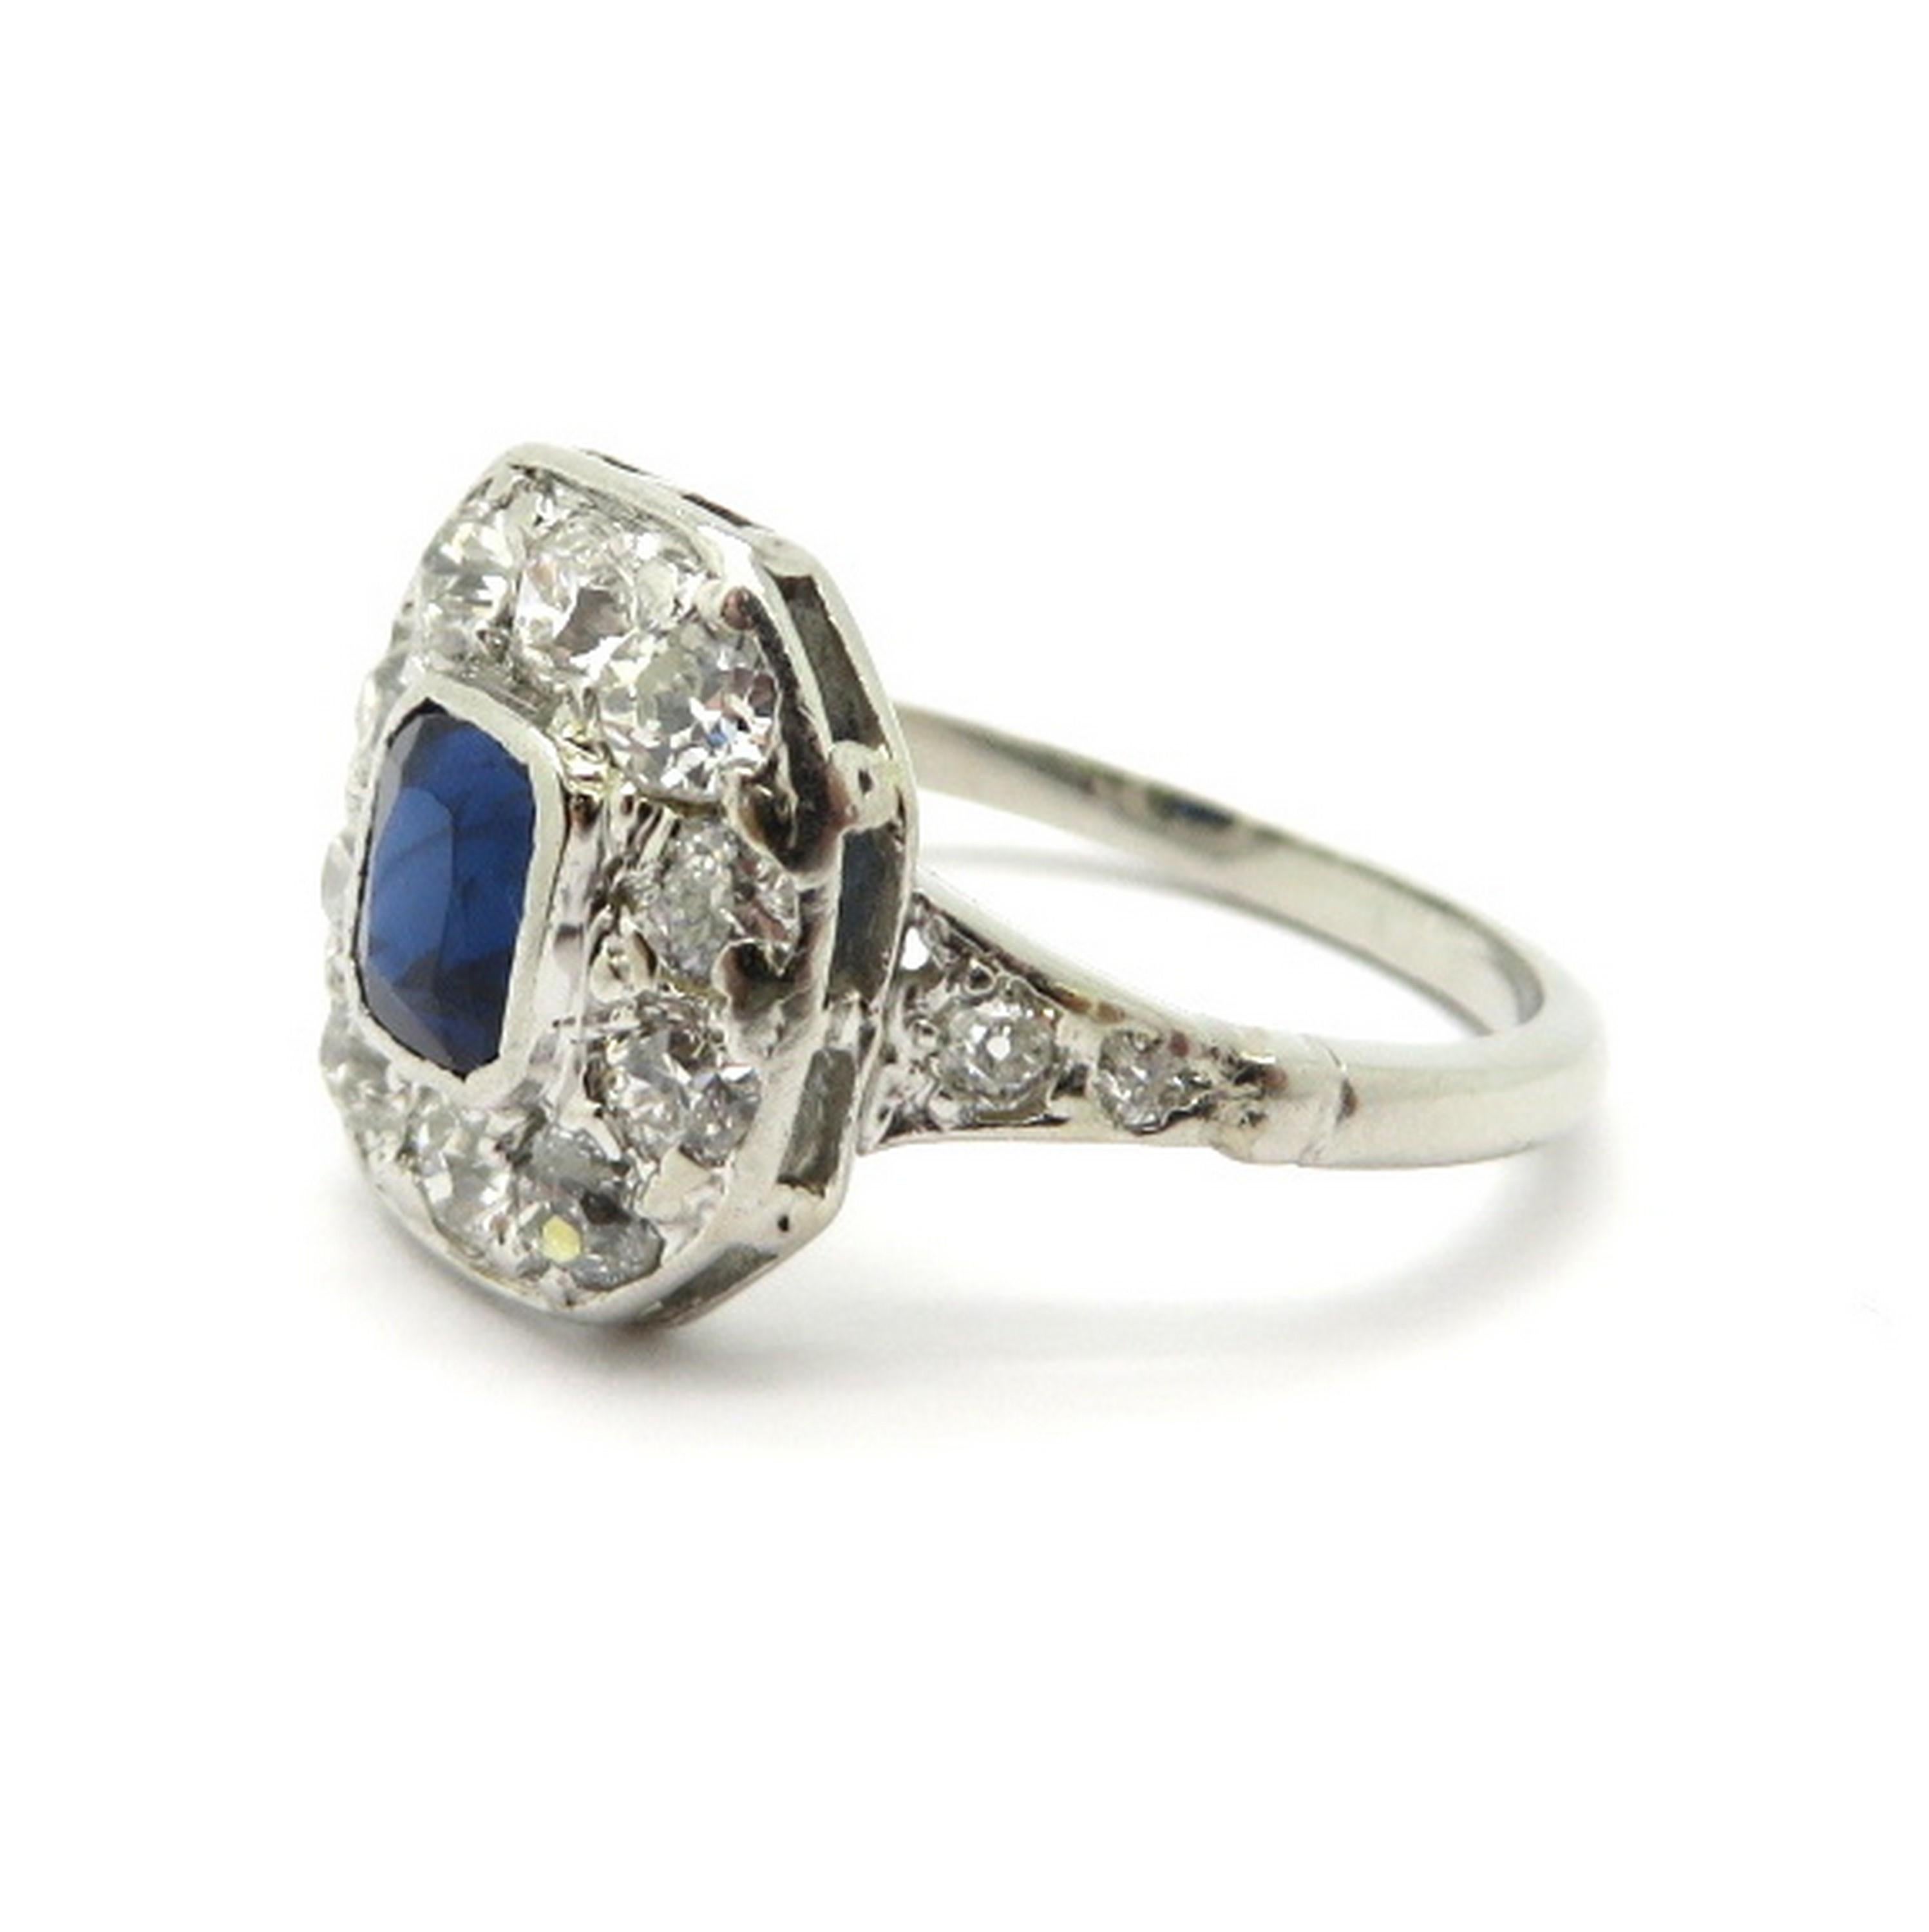 Platinum Art Deco style sapphire and diamond ring. Showcasing one fine quality natural bezel set cushion shaped sapphire weighing approximately 0.70 carats. Accented with 14 micro prong set Old European cut diamonds, weighing a combined total of